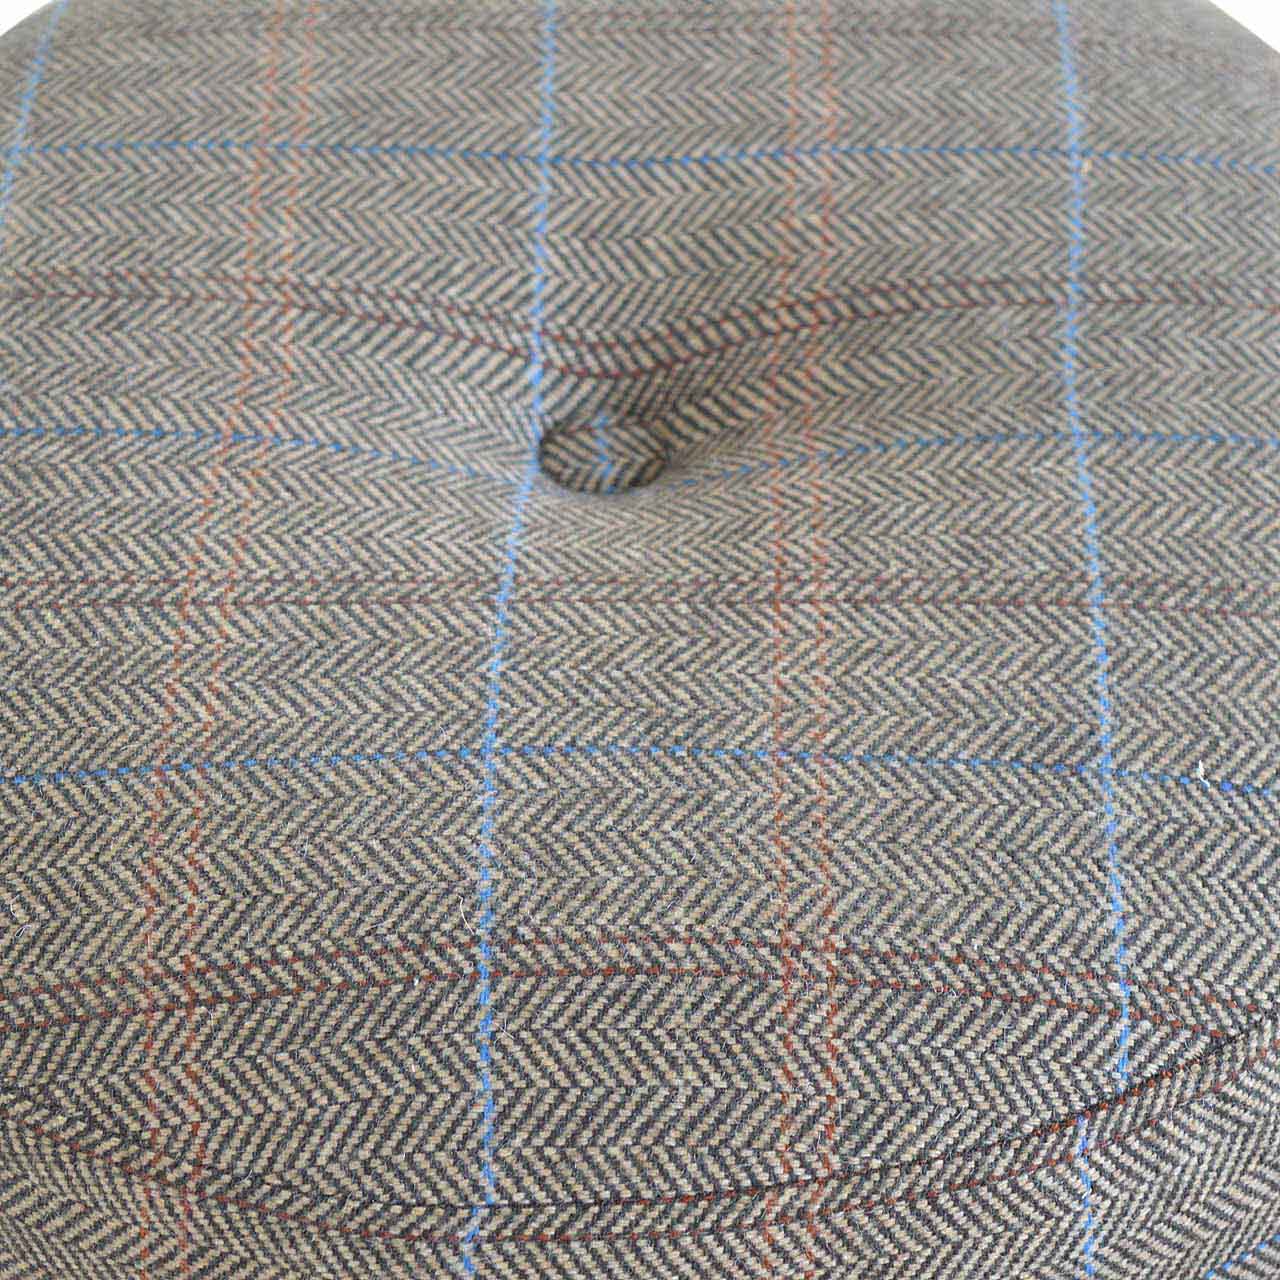 View Tripod Stool with Tweed Seat Pad information